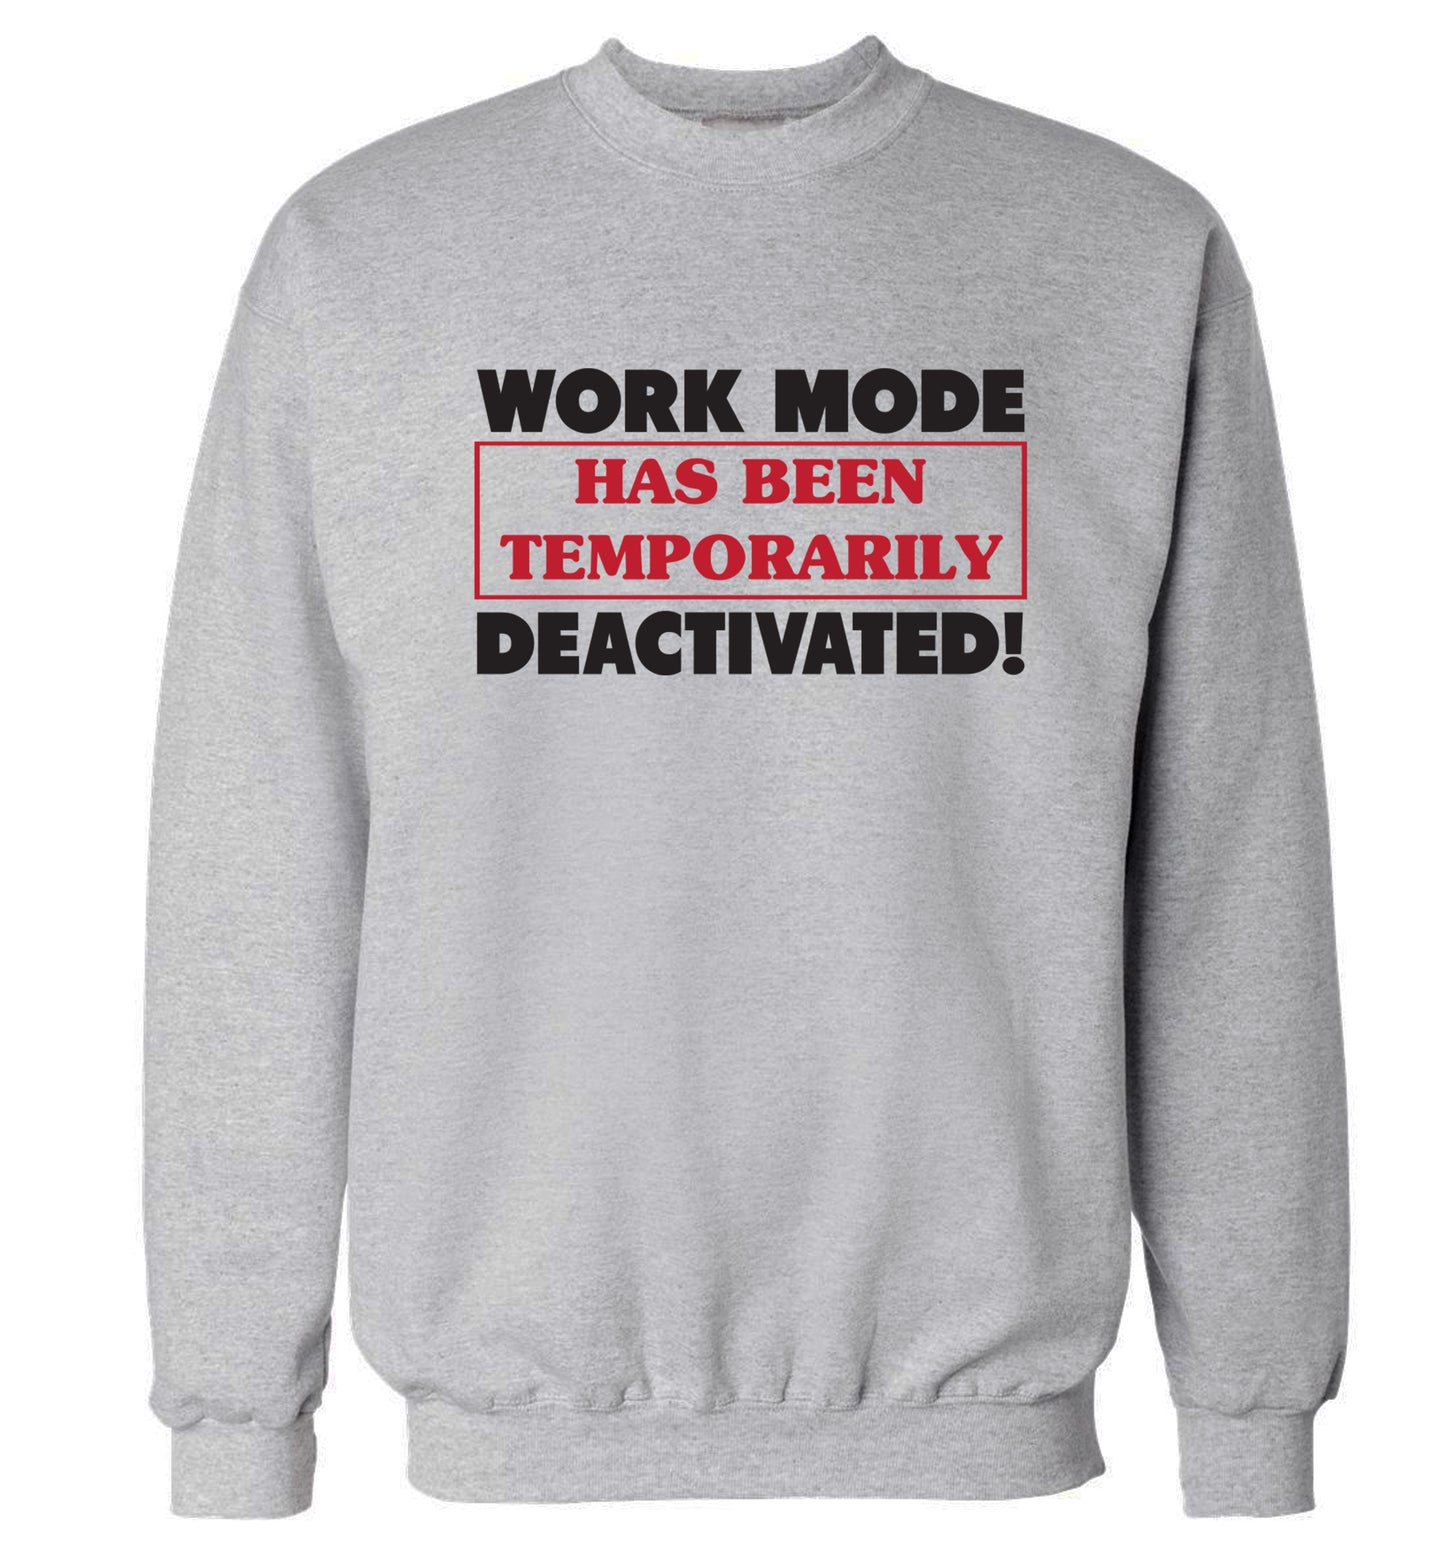 Work mode has now been temporarily deactivated Adult's unisex grey Sweater 2XL